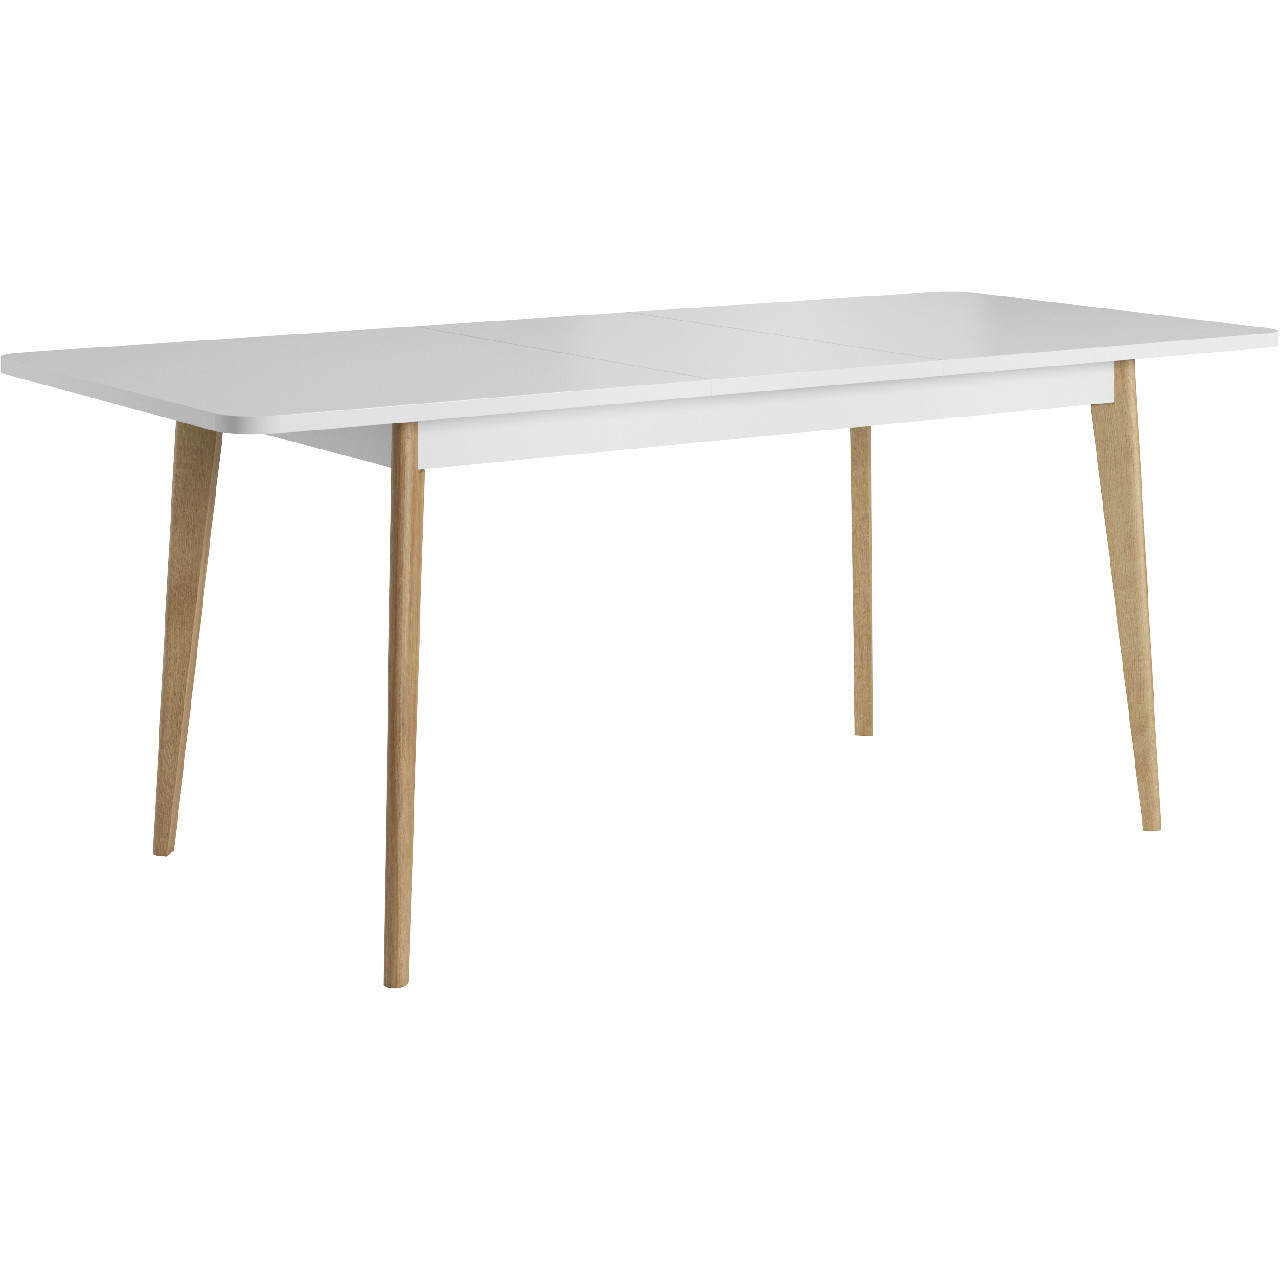 Extendable dining table PRIMO 10 riviera oak / white